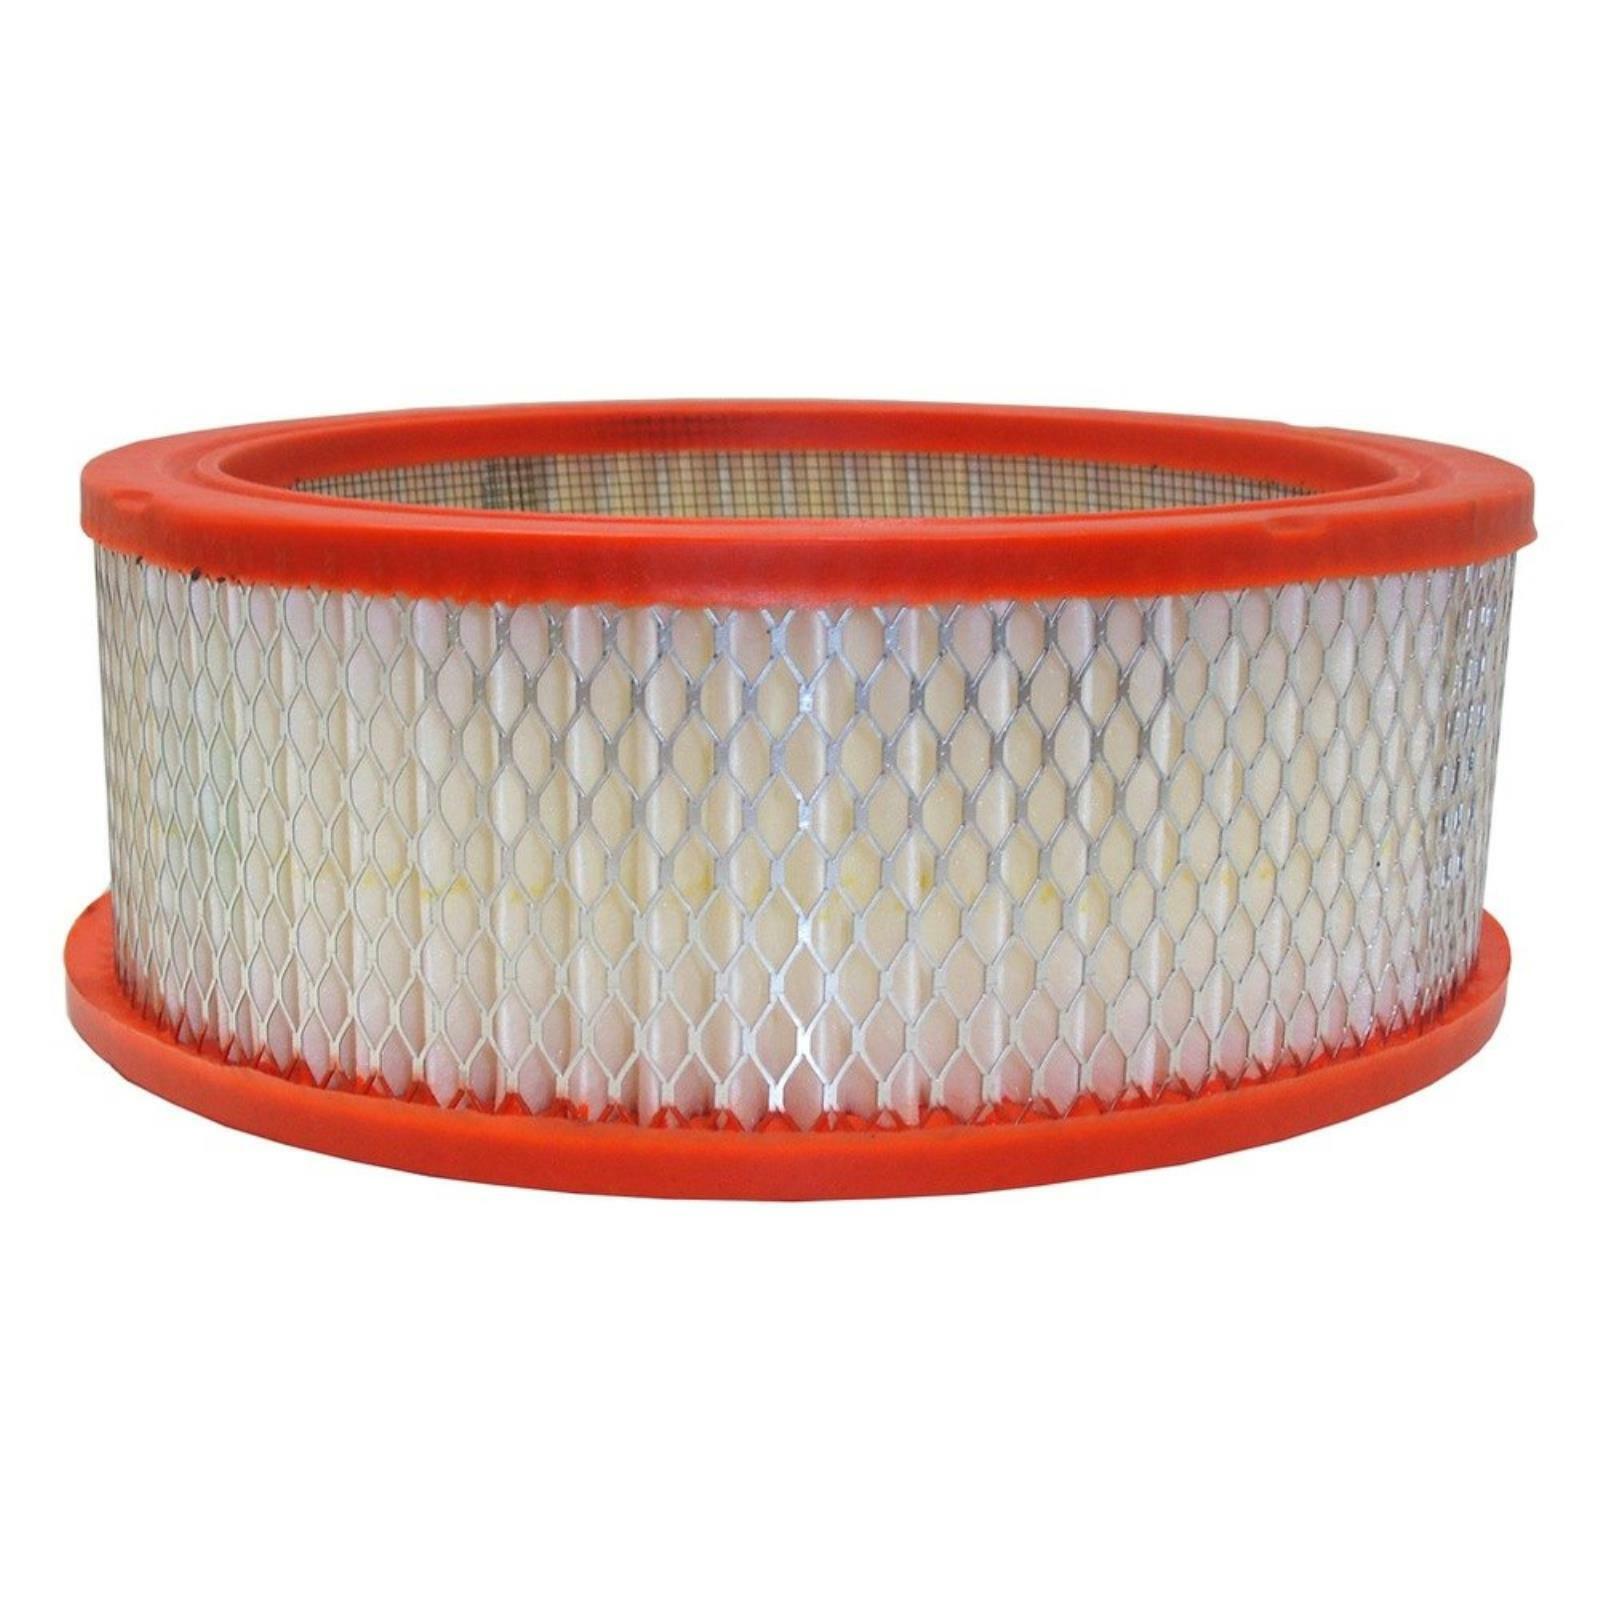 FRAM 05B471 - Extra GuardTM Round Air Filter Fits 1960-1974 Plymouth Valiant